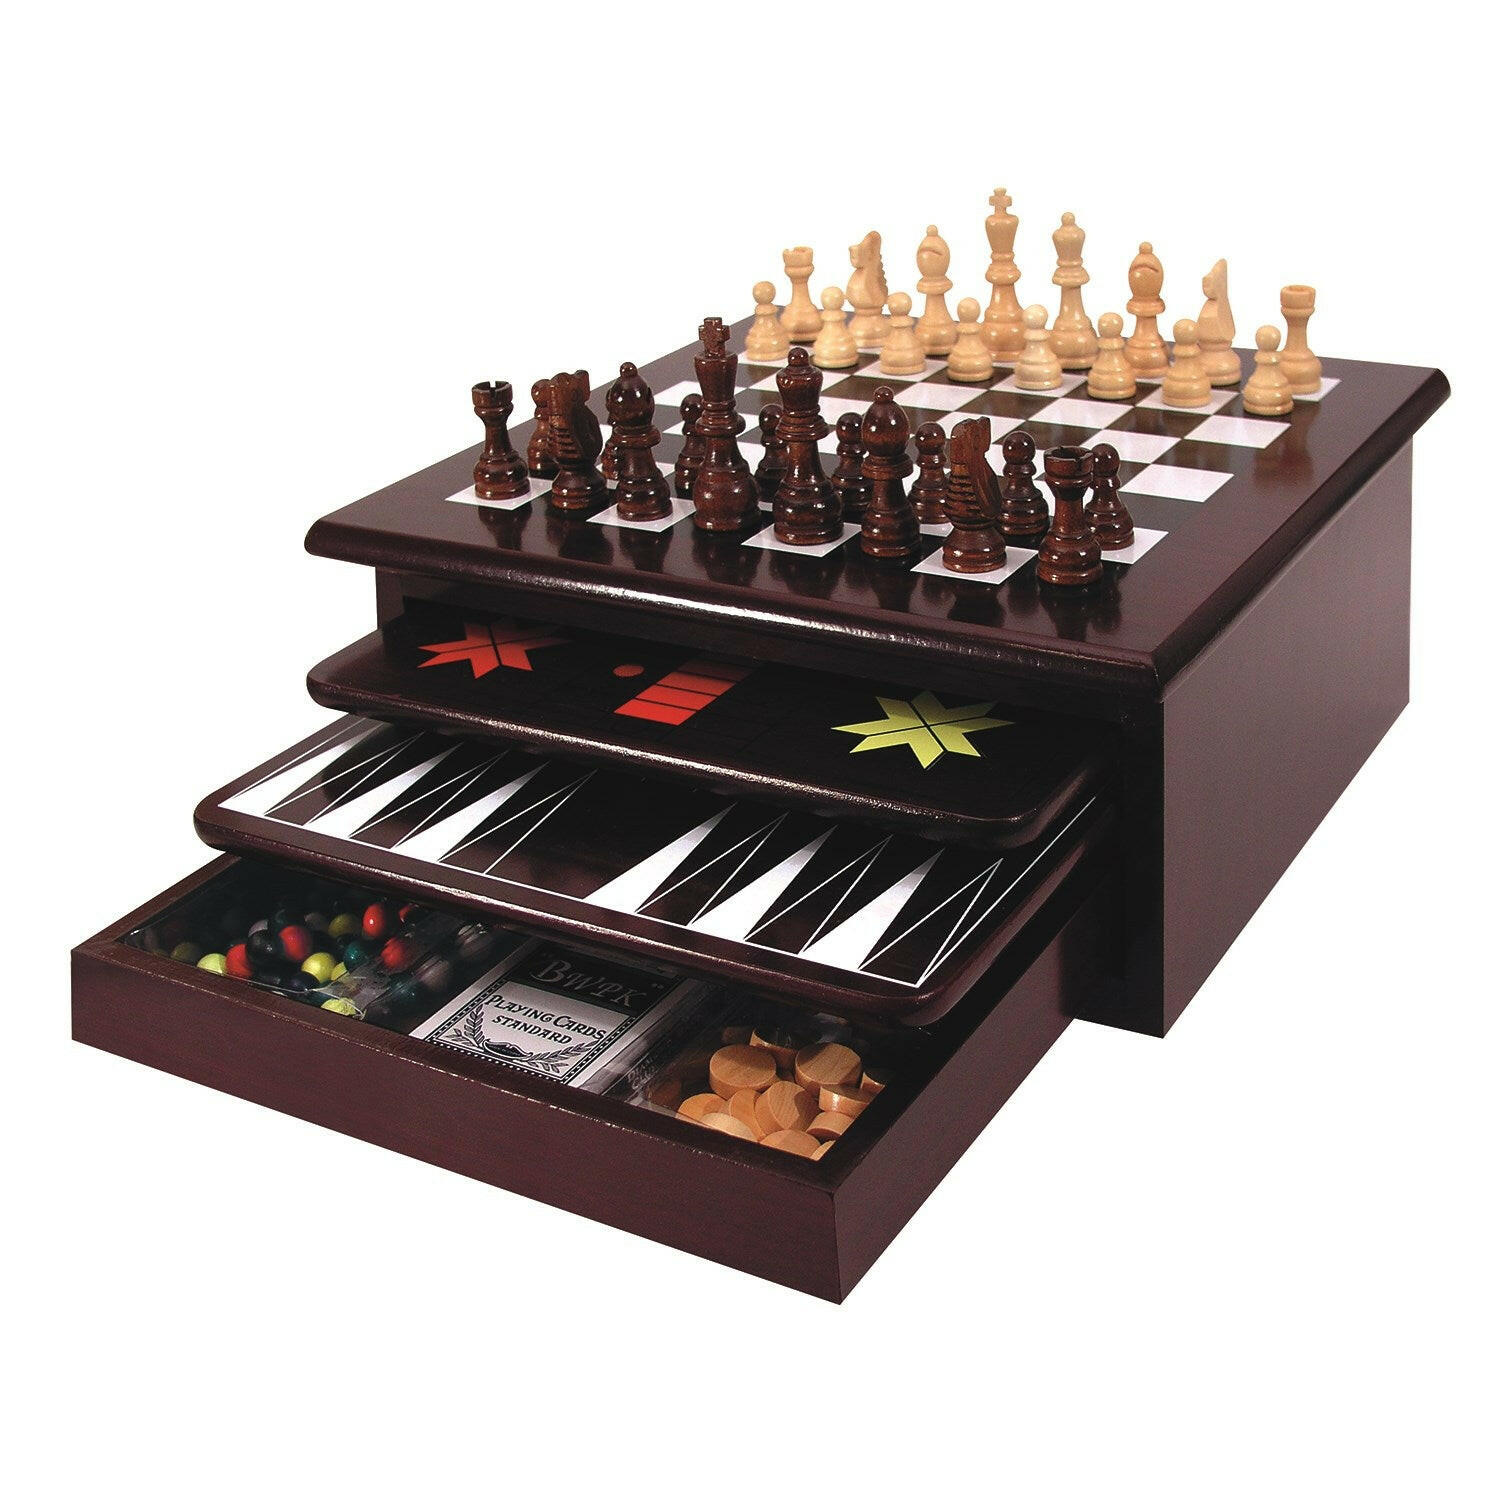 Wooden 15-in-1 Game Center.